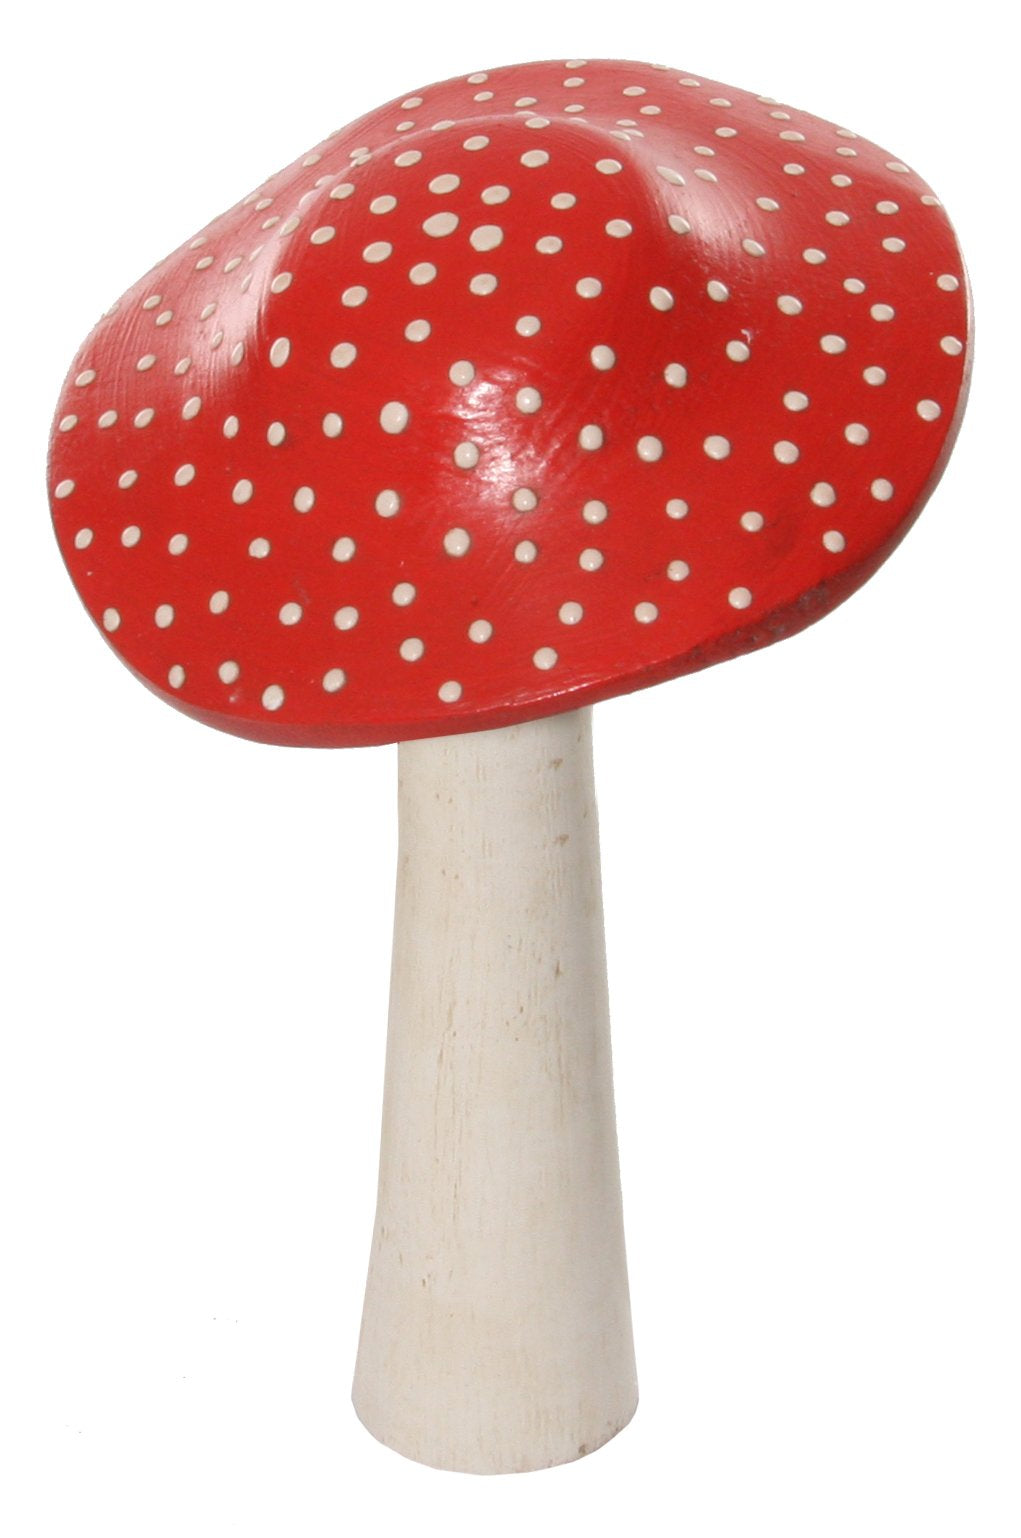 Wooden Mushroom - Red with White Dots 8.5